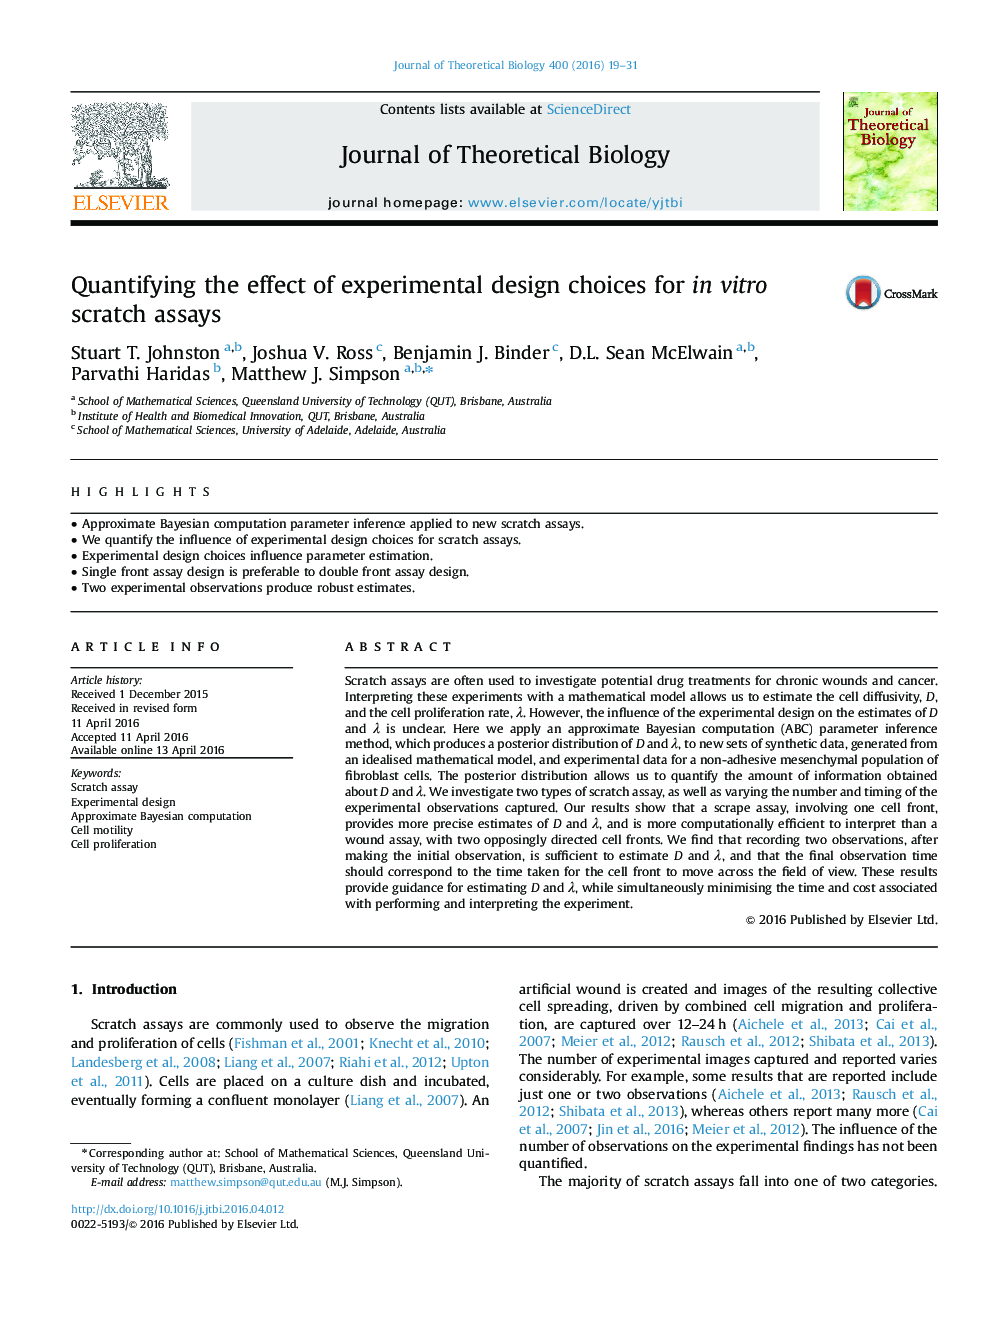 Quantifying the effect of experimental design choices for in vitro scratch assays